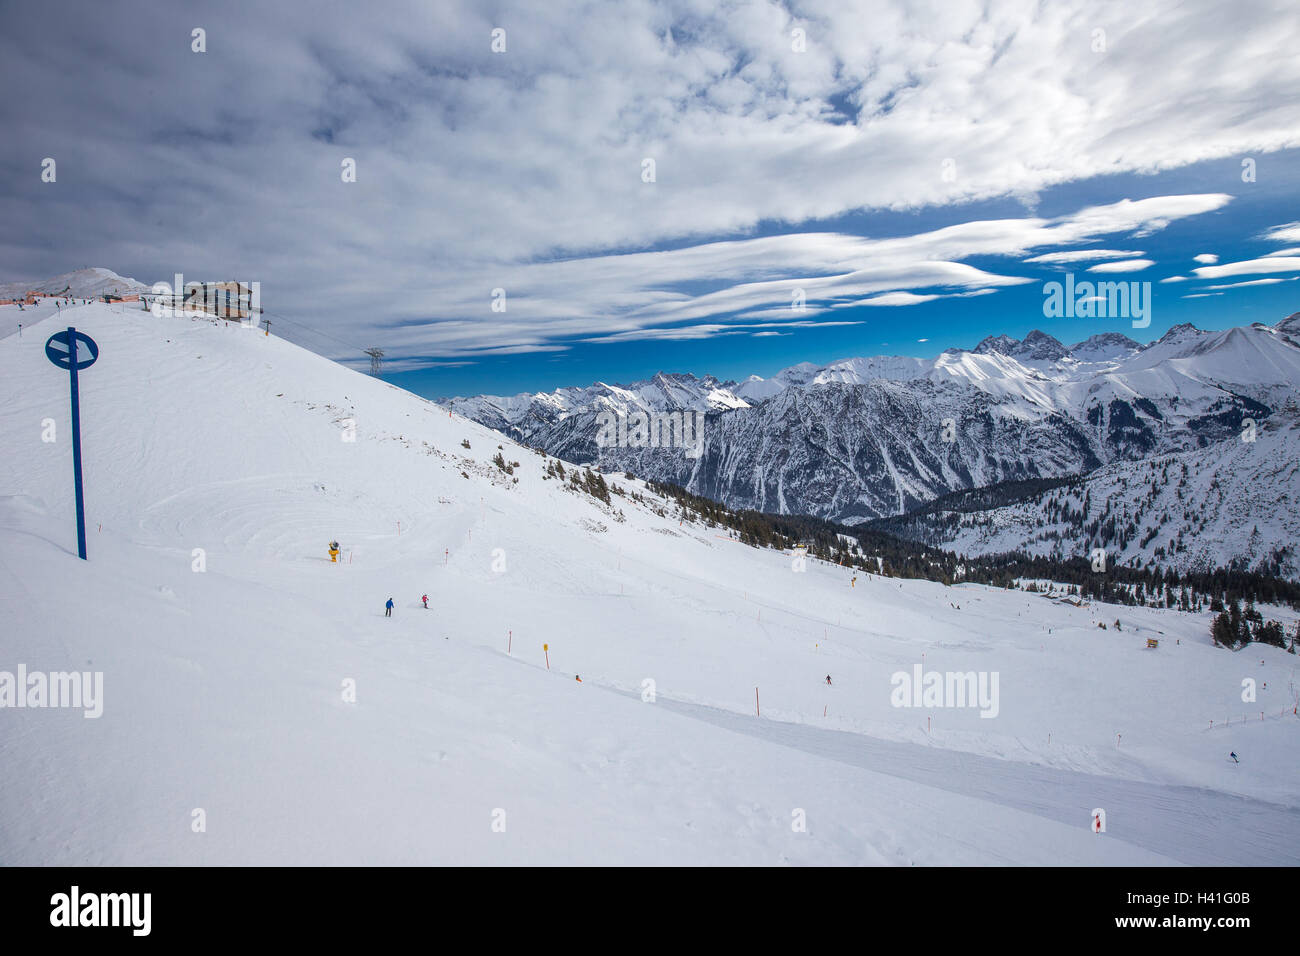 View to Ski slopes with the corduroy pattern and ski chairlifts on the top of Fellhorn Ski resort, Bavarian Alps, Oberstdorf Stock Photo